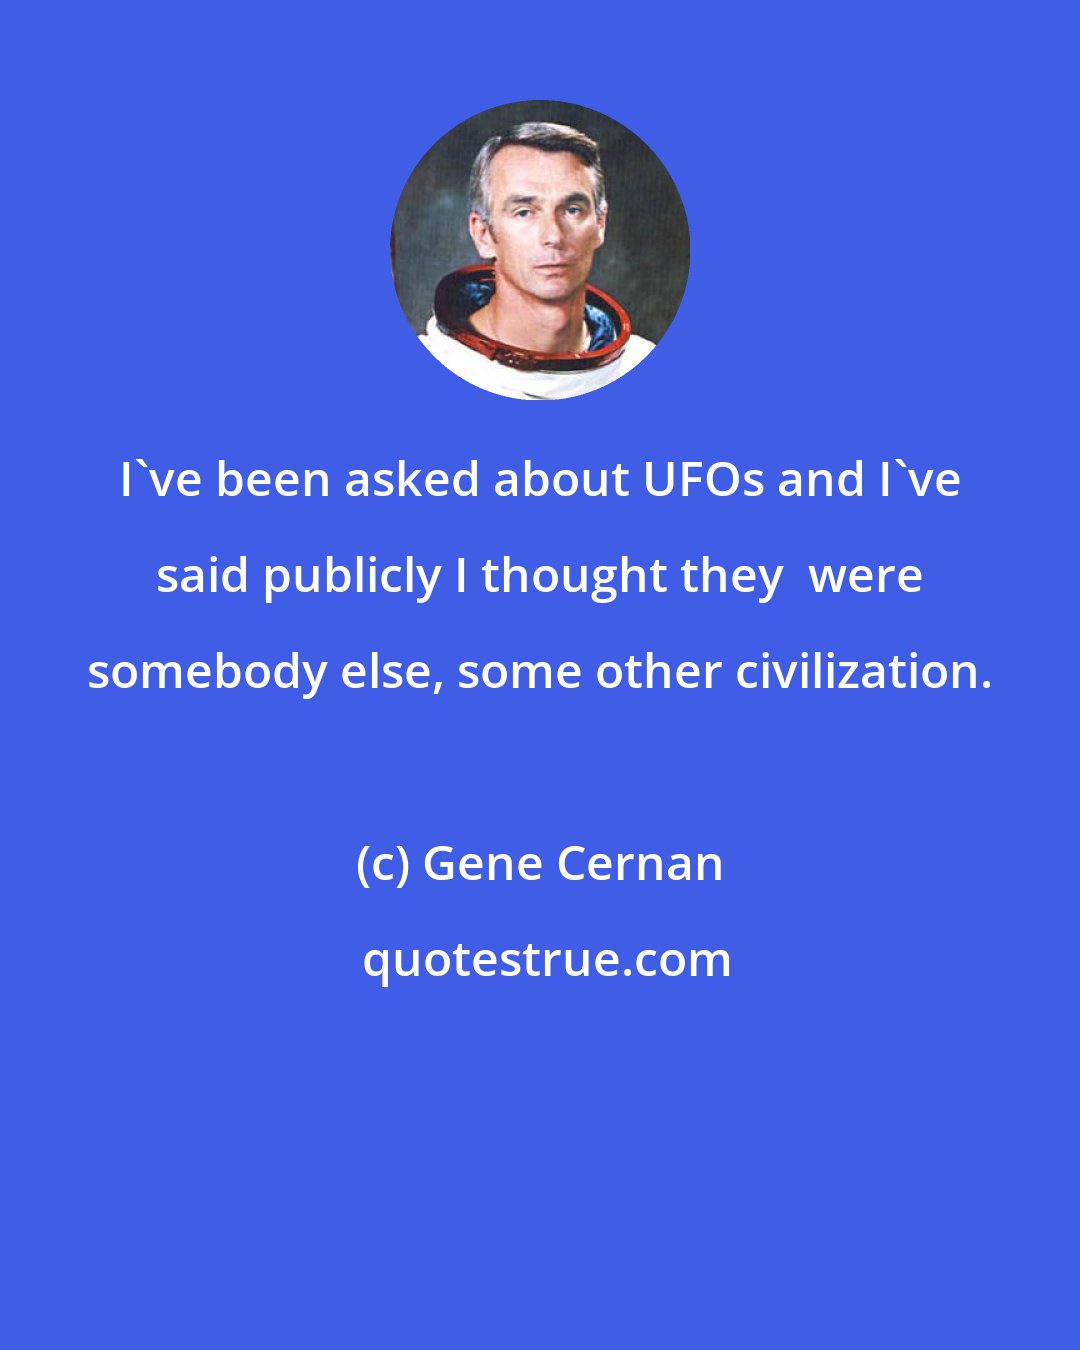 Gene Cernan: I've been asked about UFOs and I've said publicly I thought they  were somebody else, some other civilization.